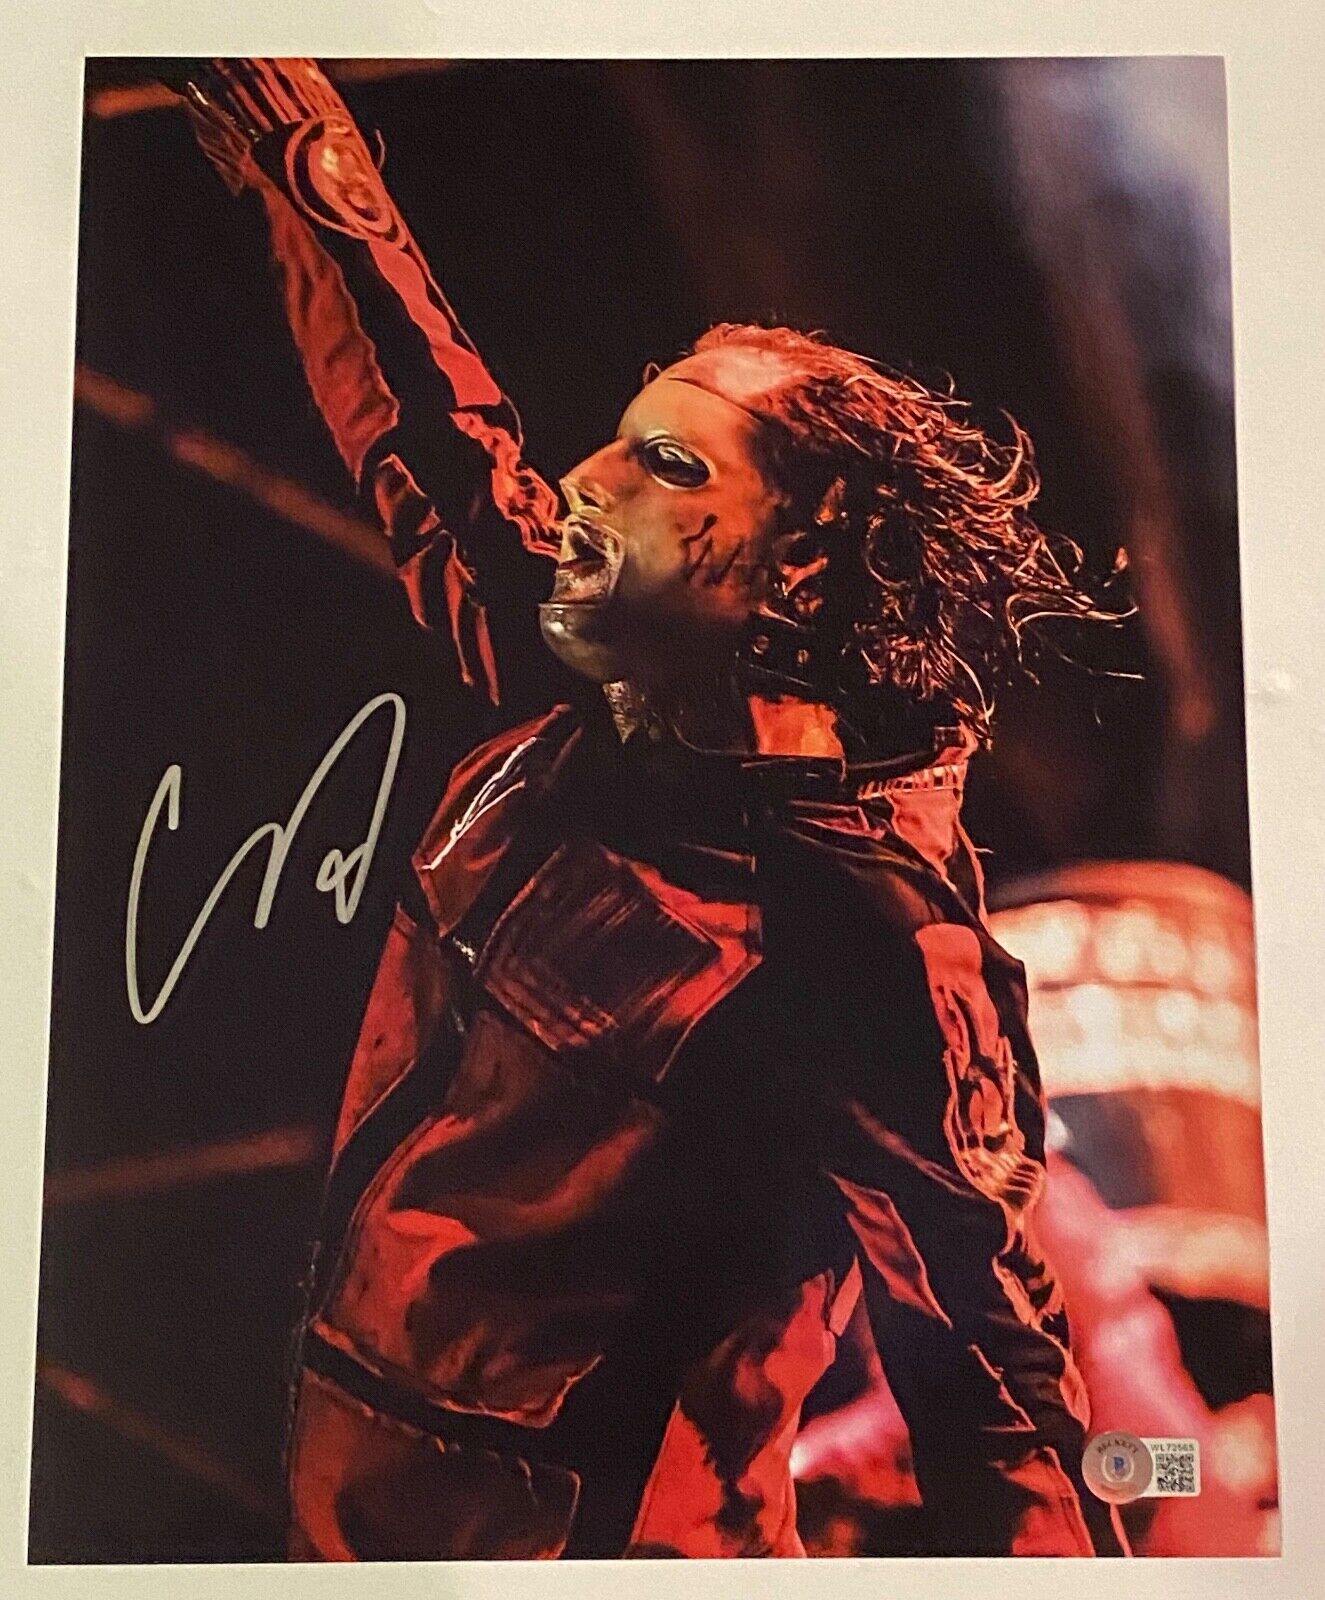 Corey Taylor Signed Autograph 11x14 Photo Poster painting Slipknot Stone Sour Proof Beckett COA